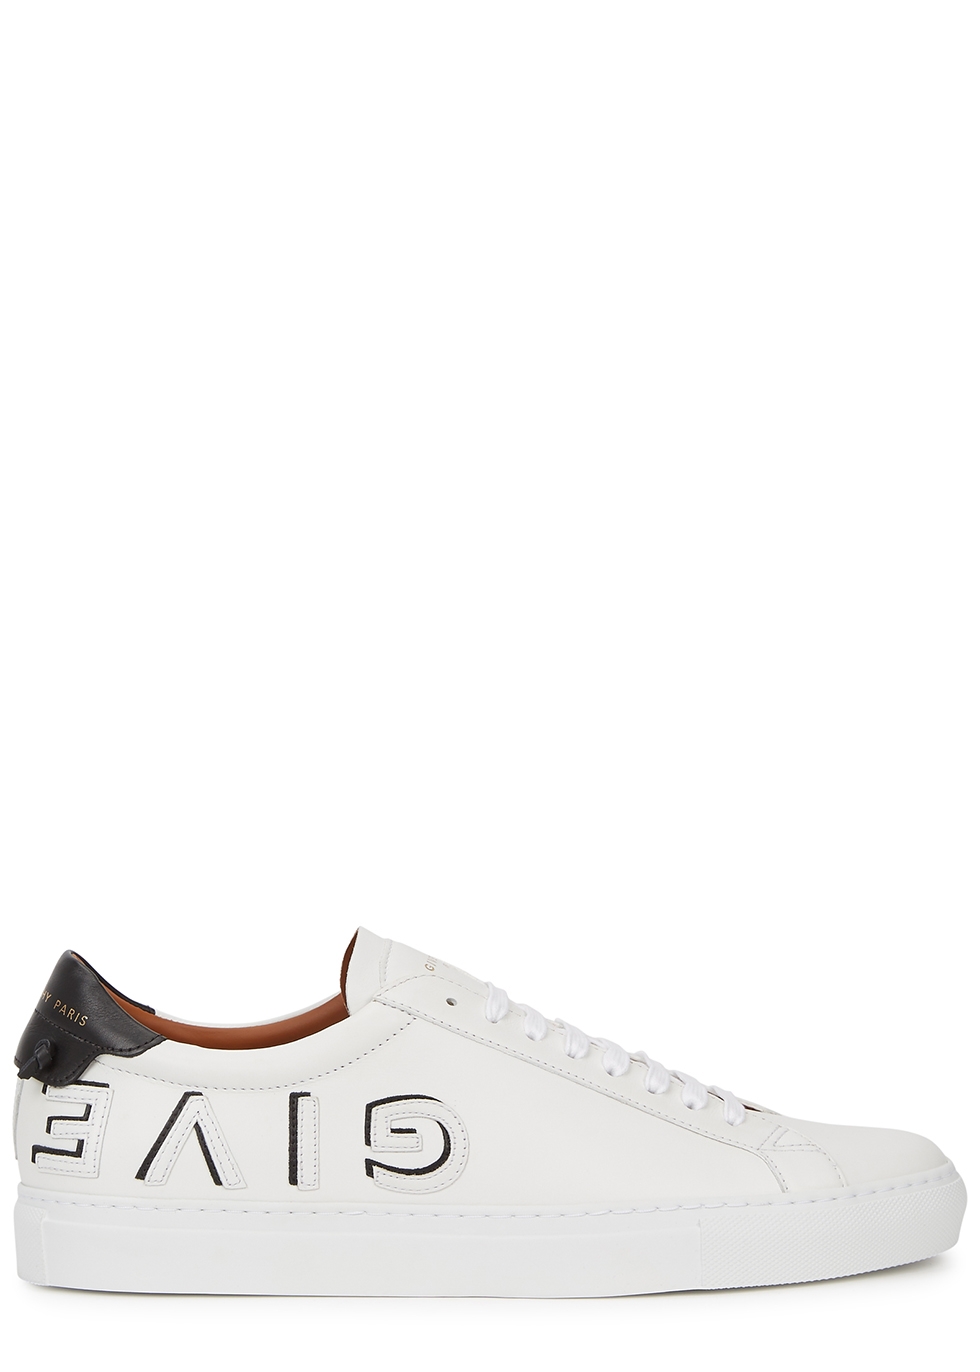 urban street sneakers givenchy